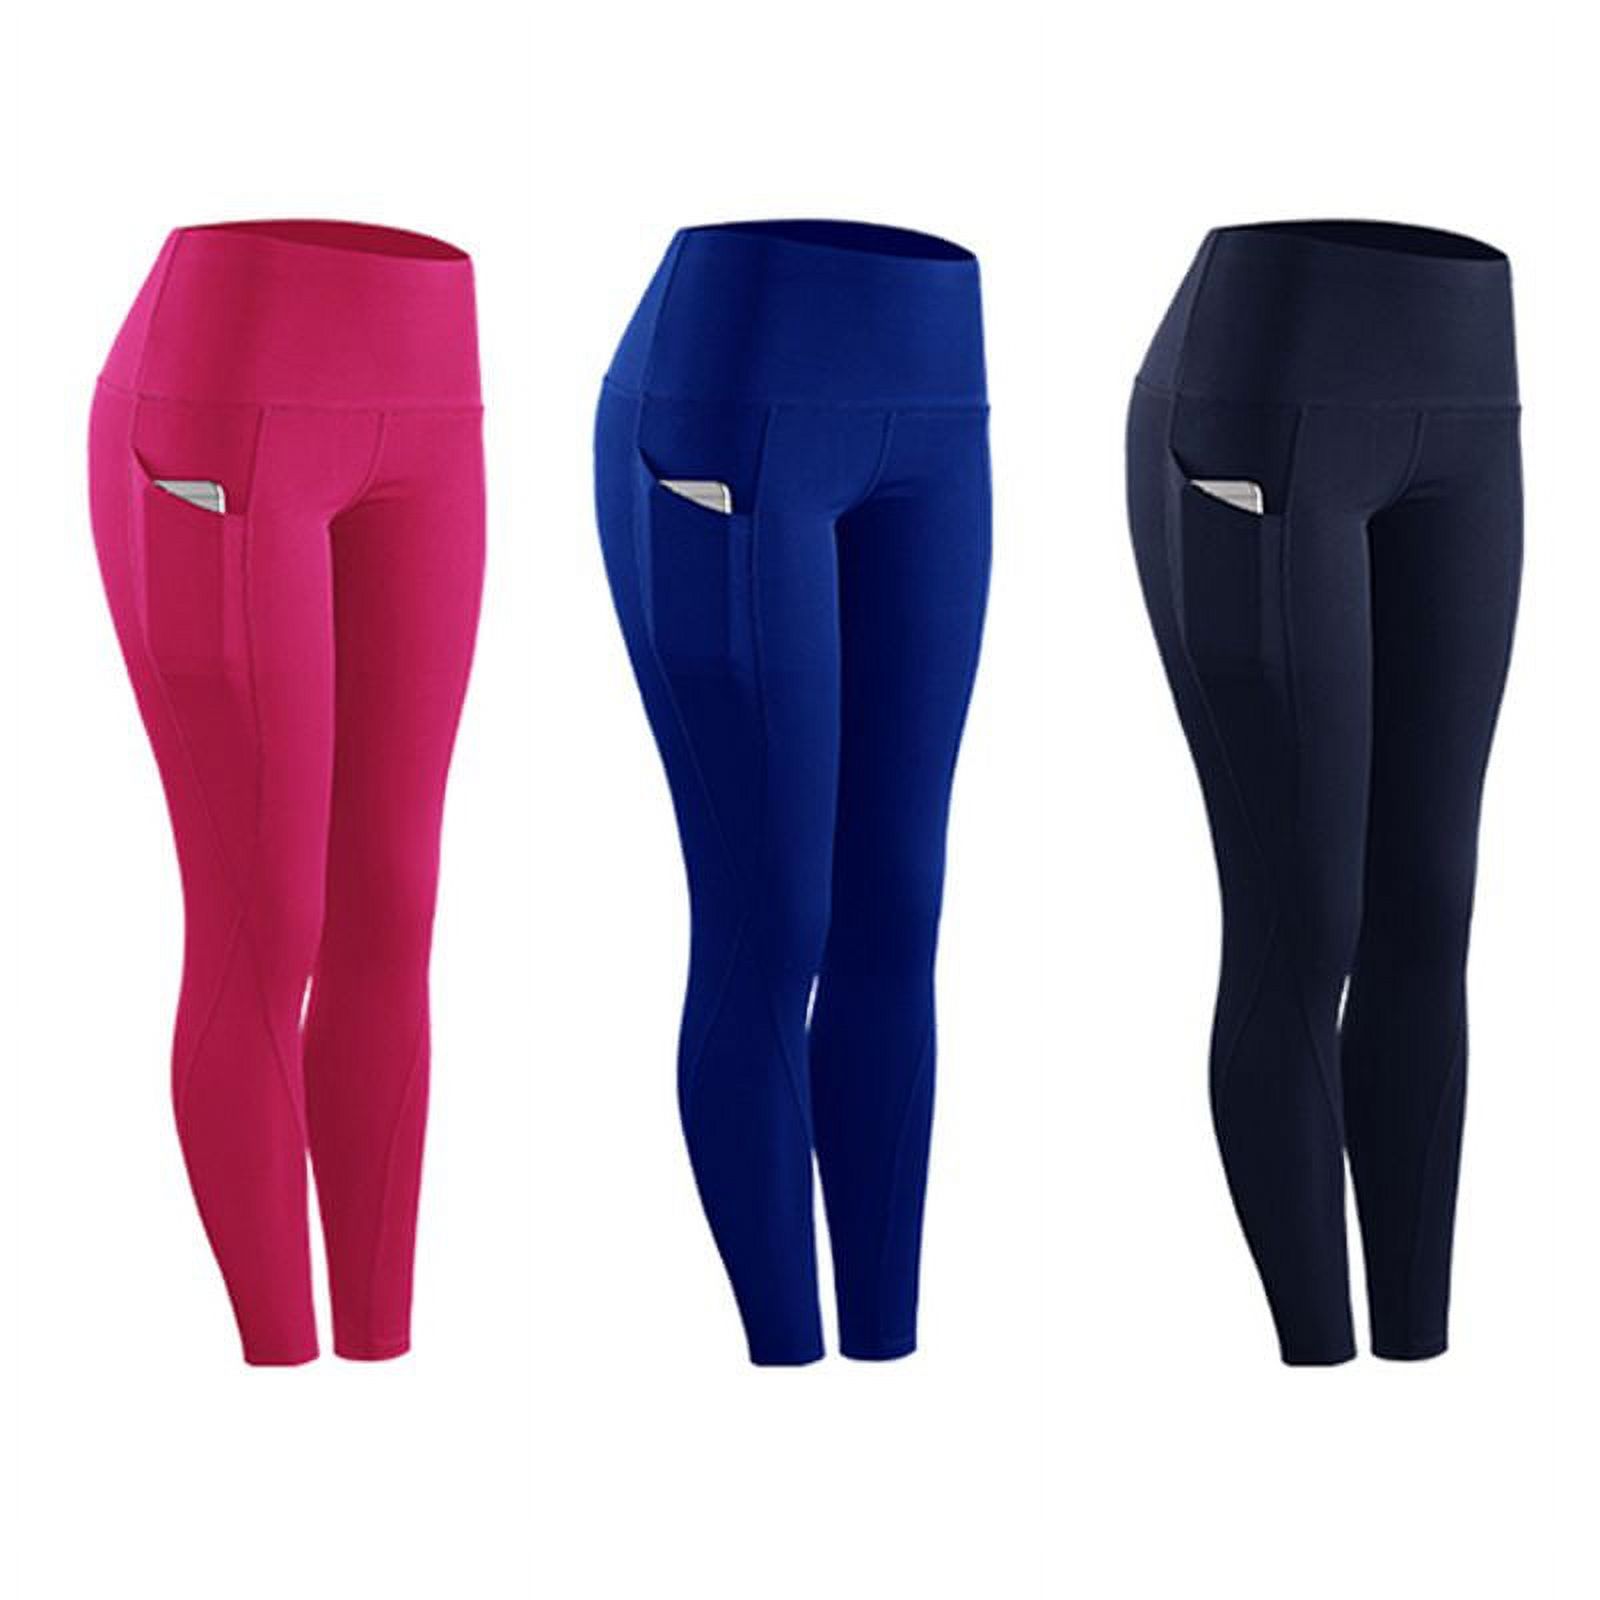 High Elastic Leggings Pant Women Solid Stretch Compression Sportswear Casual Yoga Jogging Leggings Pants With Pocket - image 1 of 6